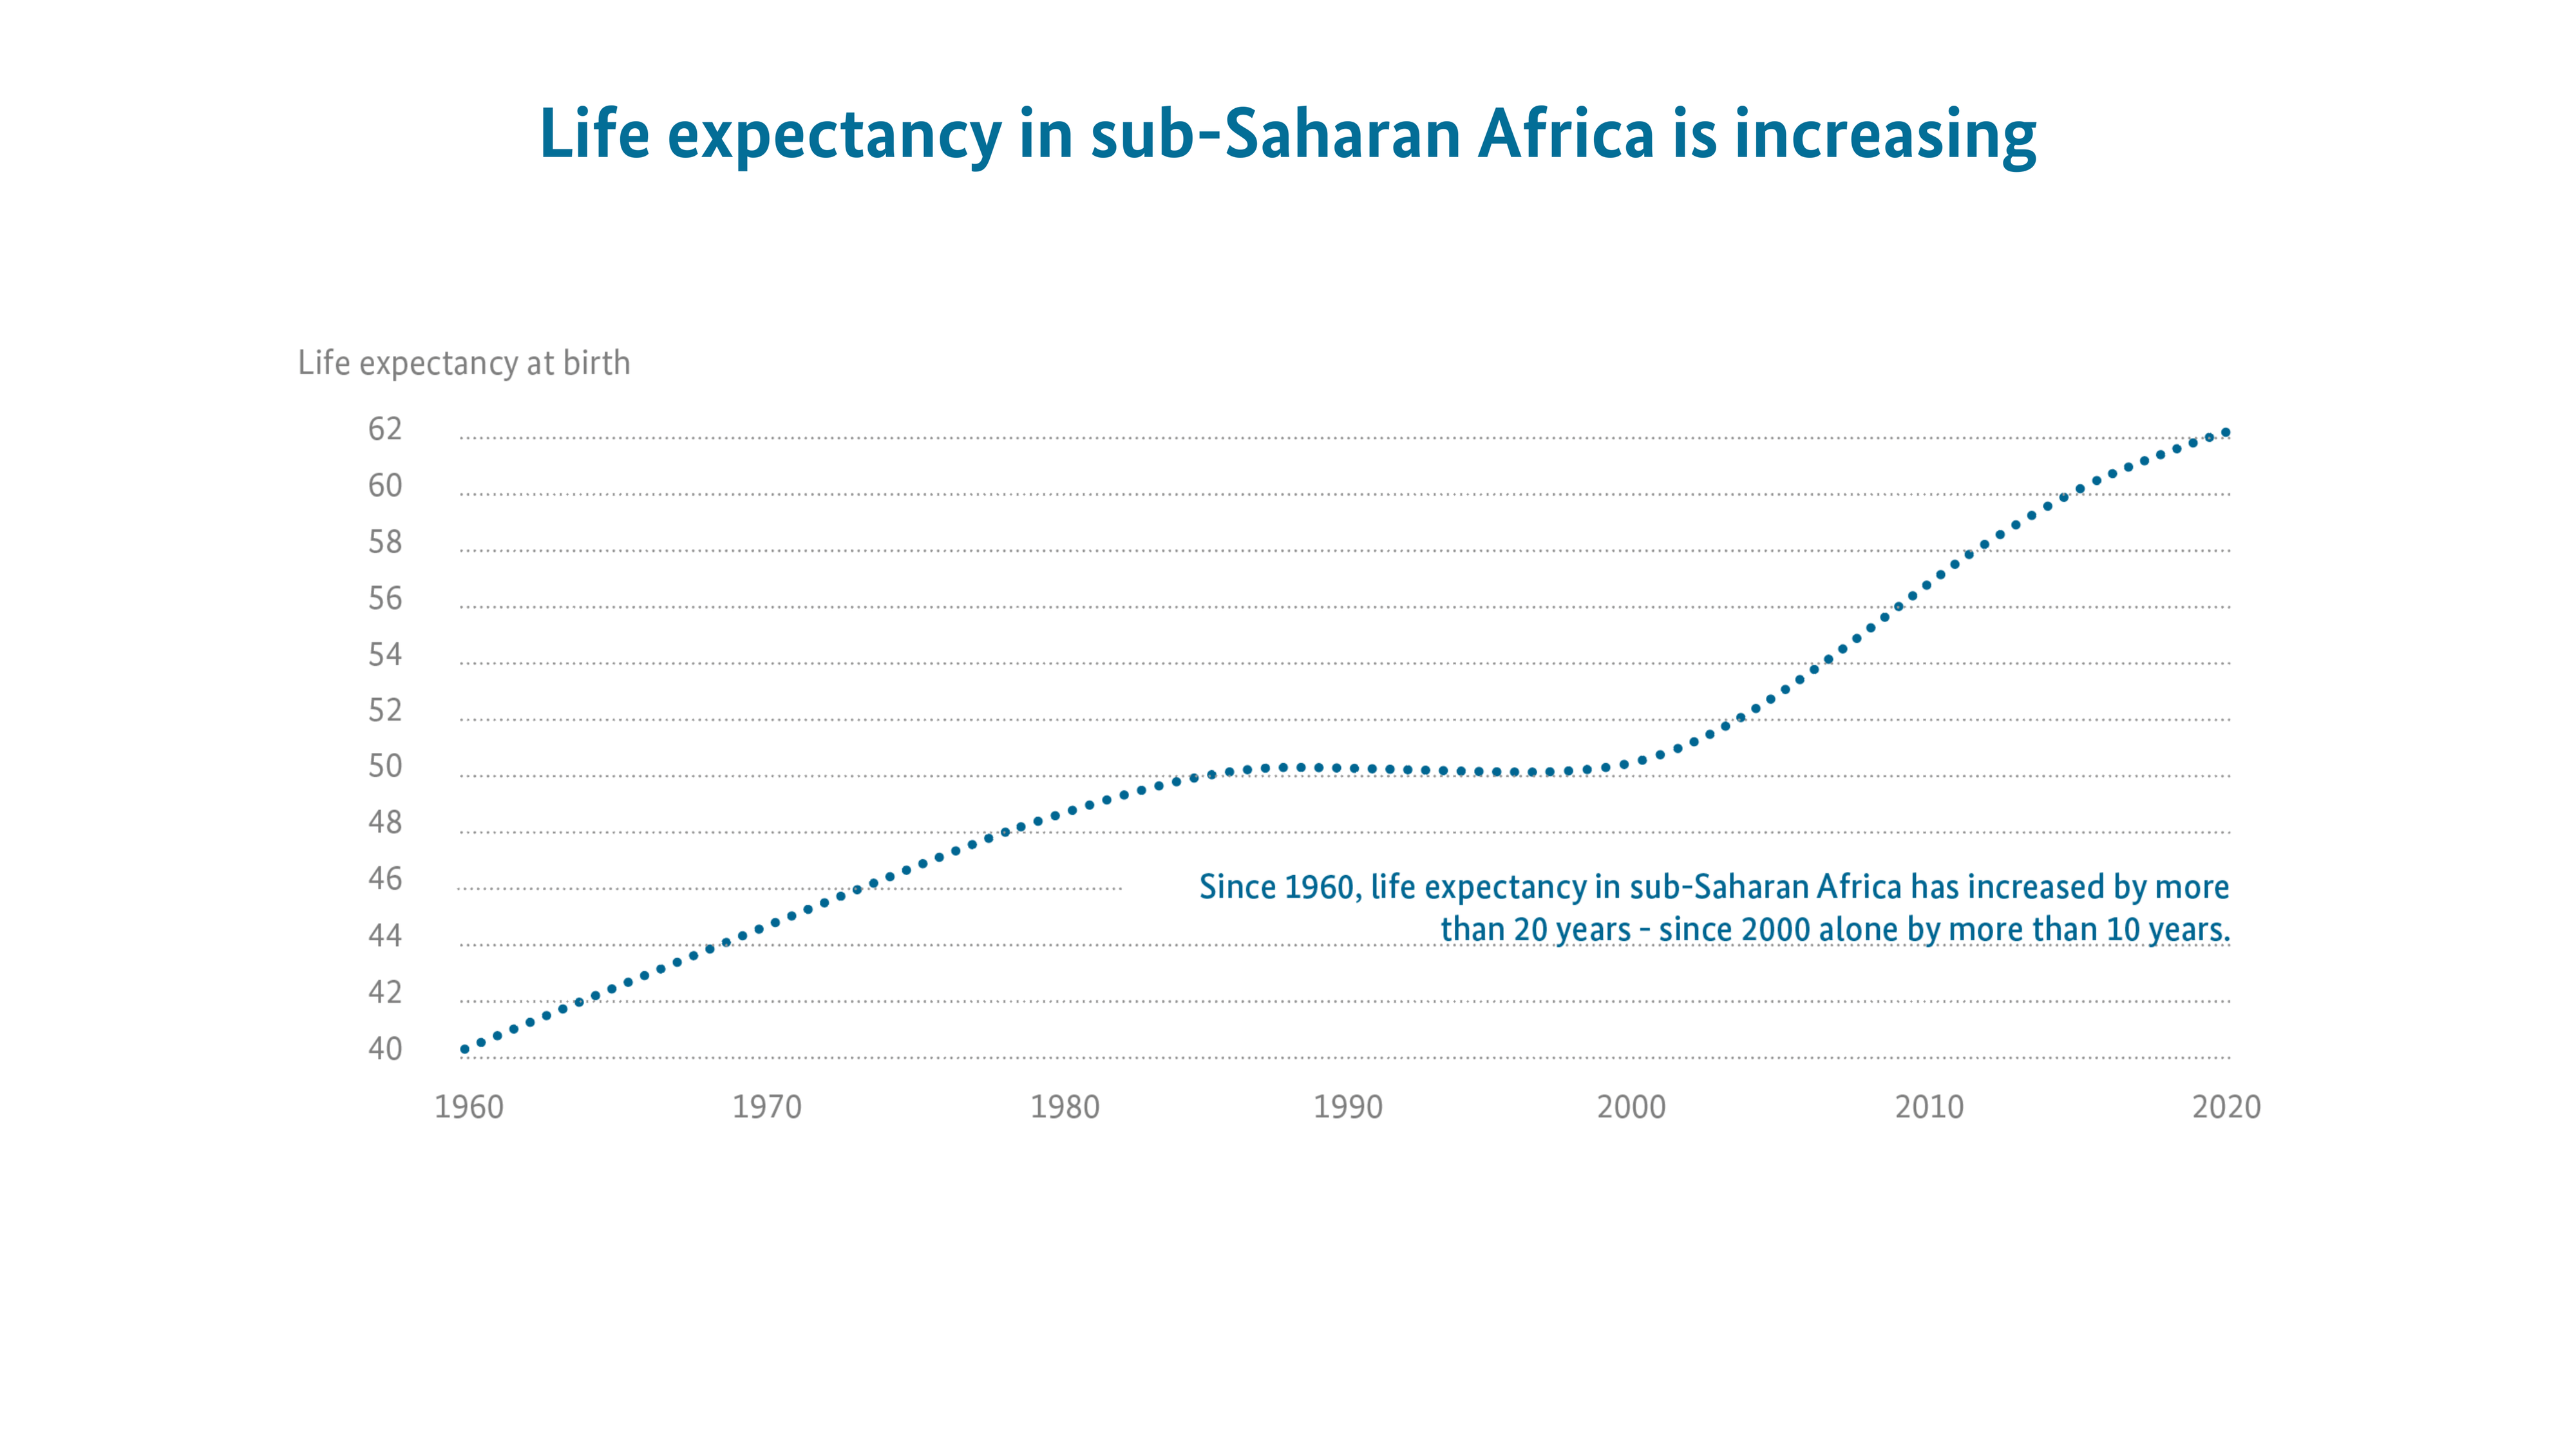 Life expectancy in sub-Saharan Africa is increasing: Since 1960, life expectancy in sub-Saharan Africa has increased by more than 20 years – since 2000 alone by more than 10 years.